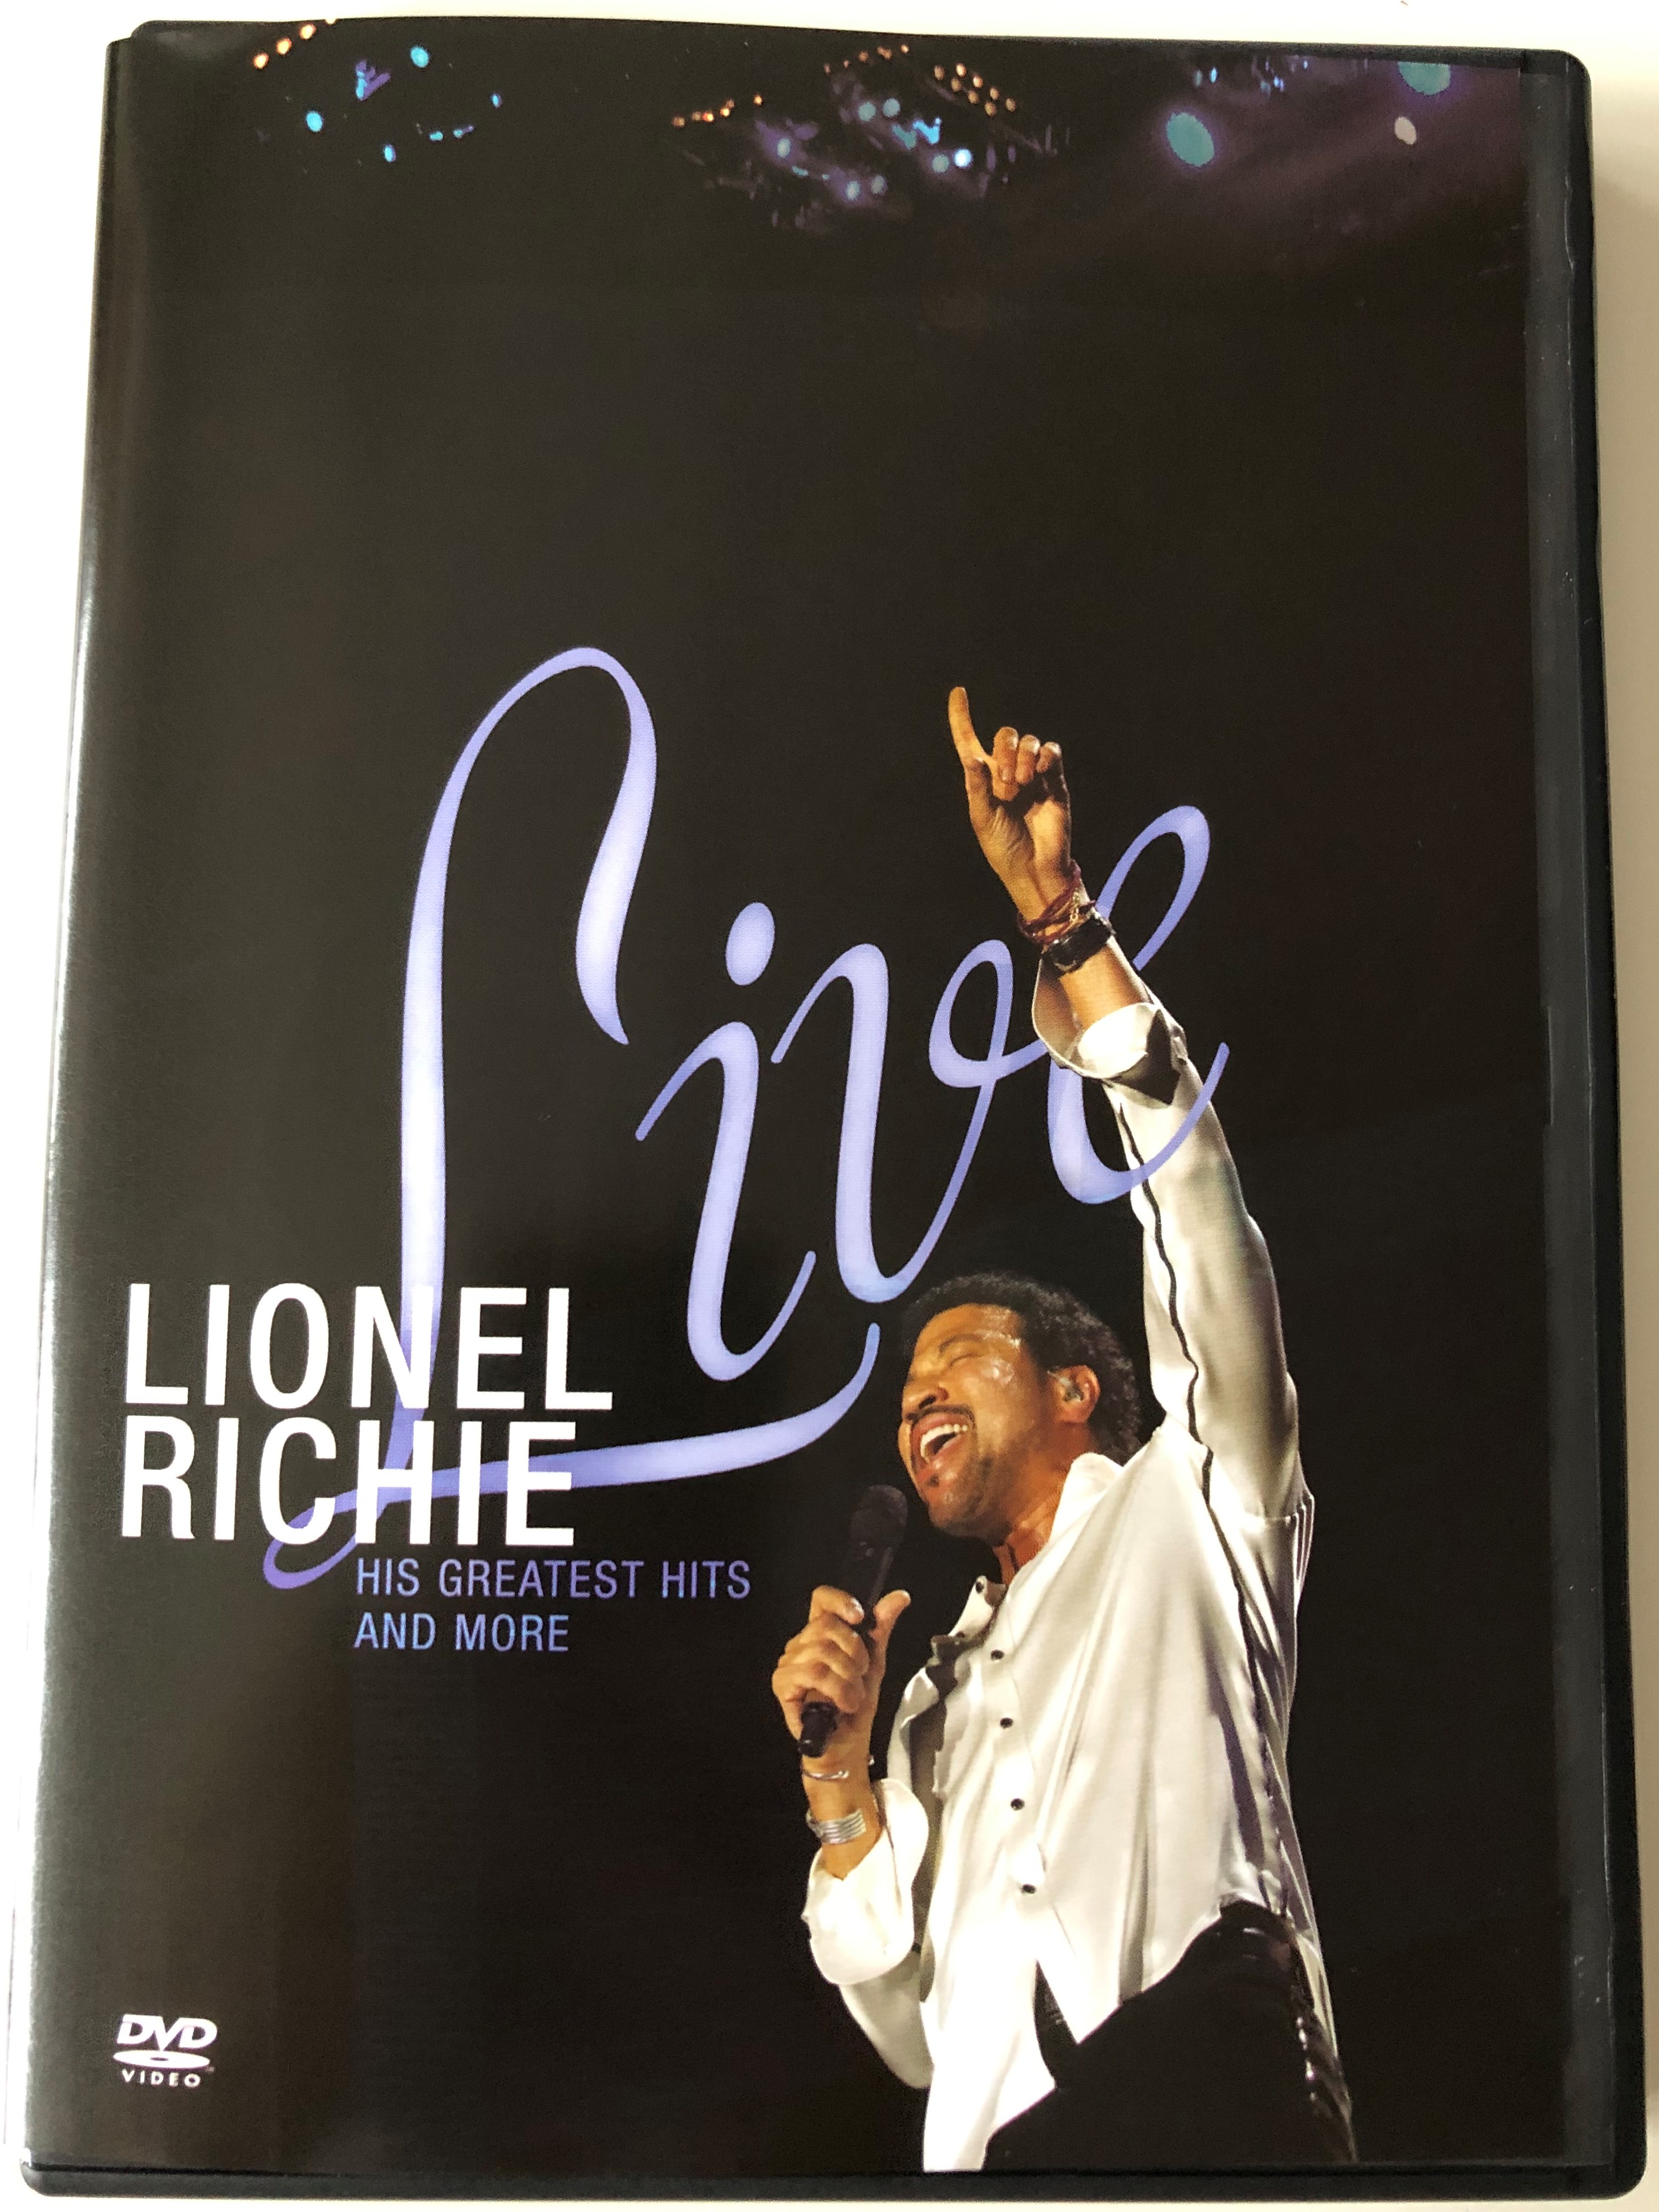 lionel-richie-live-dvd-his-greatest-hits-and-more-1.jpg